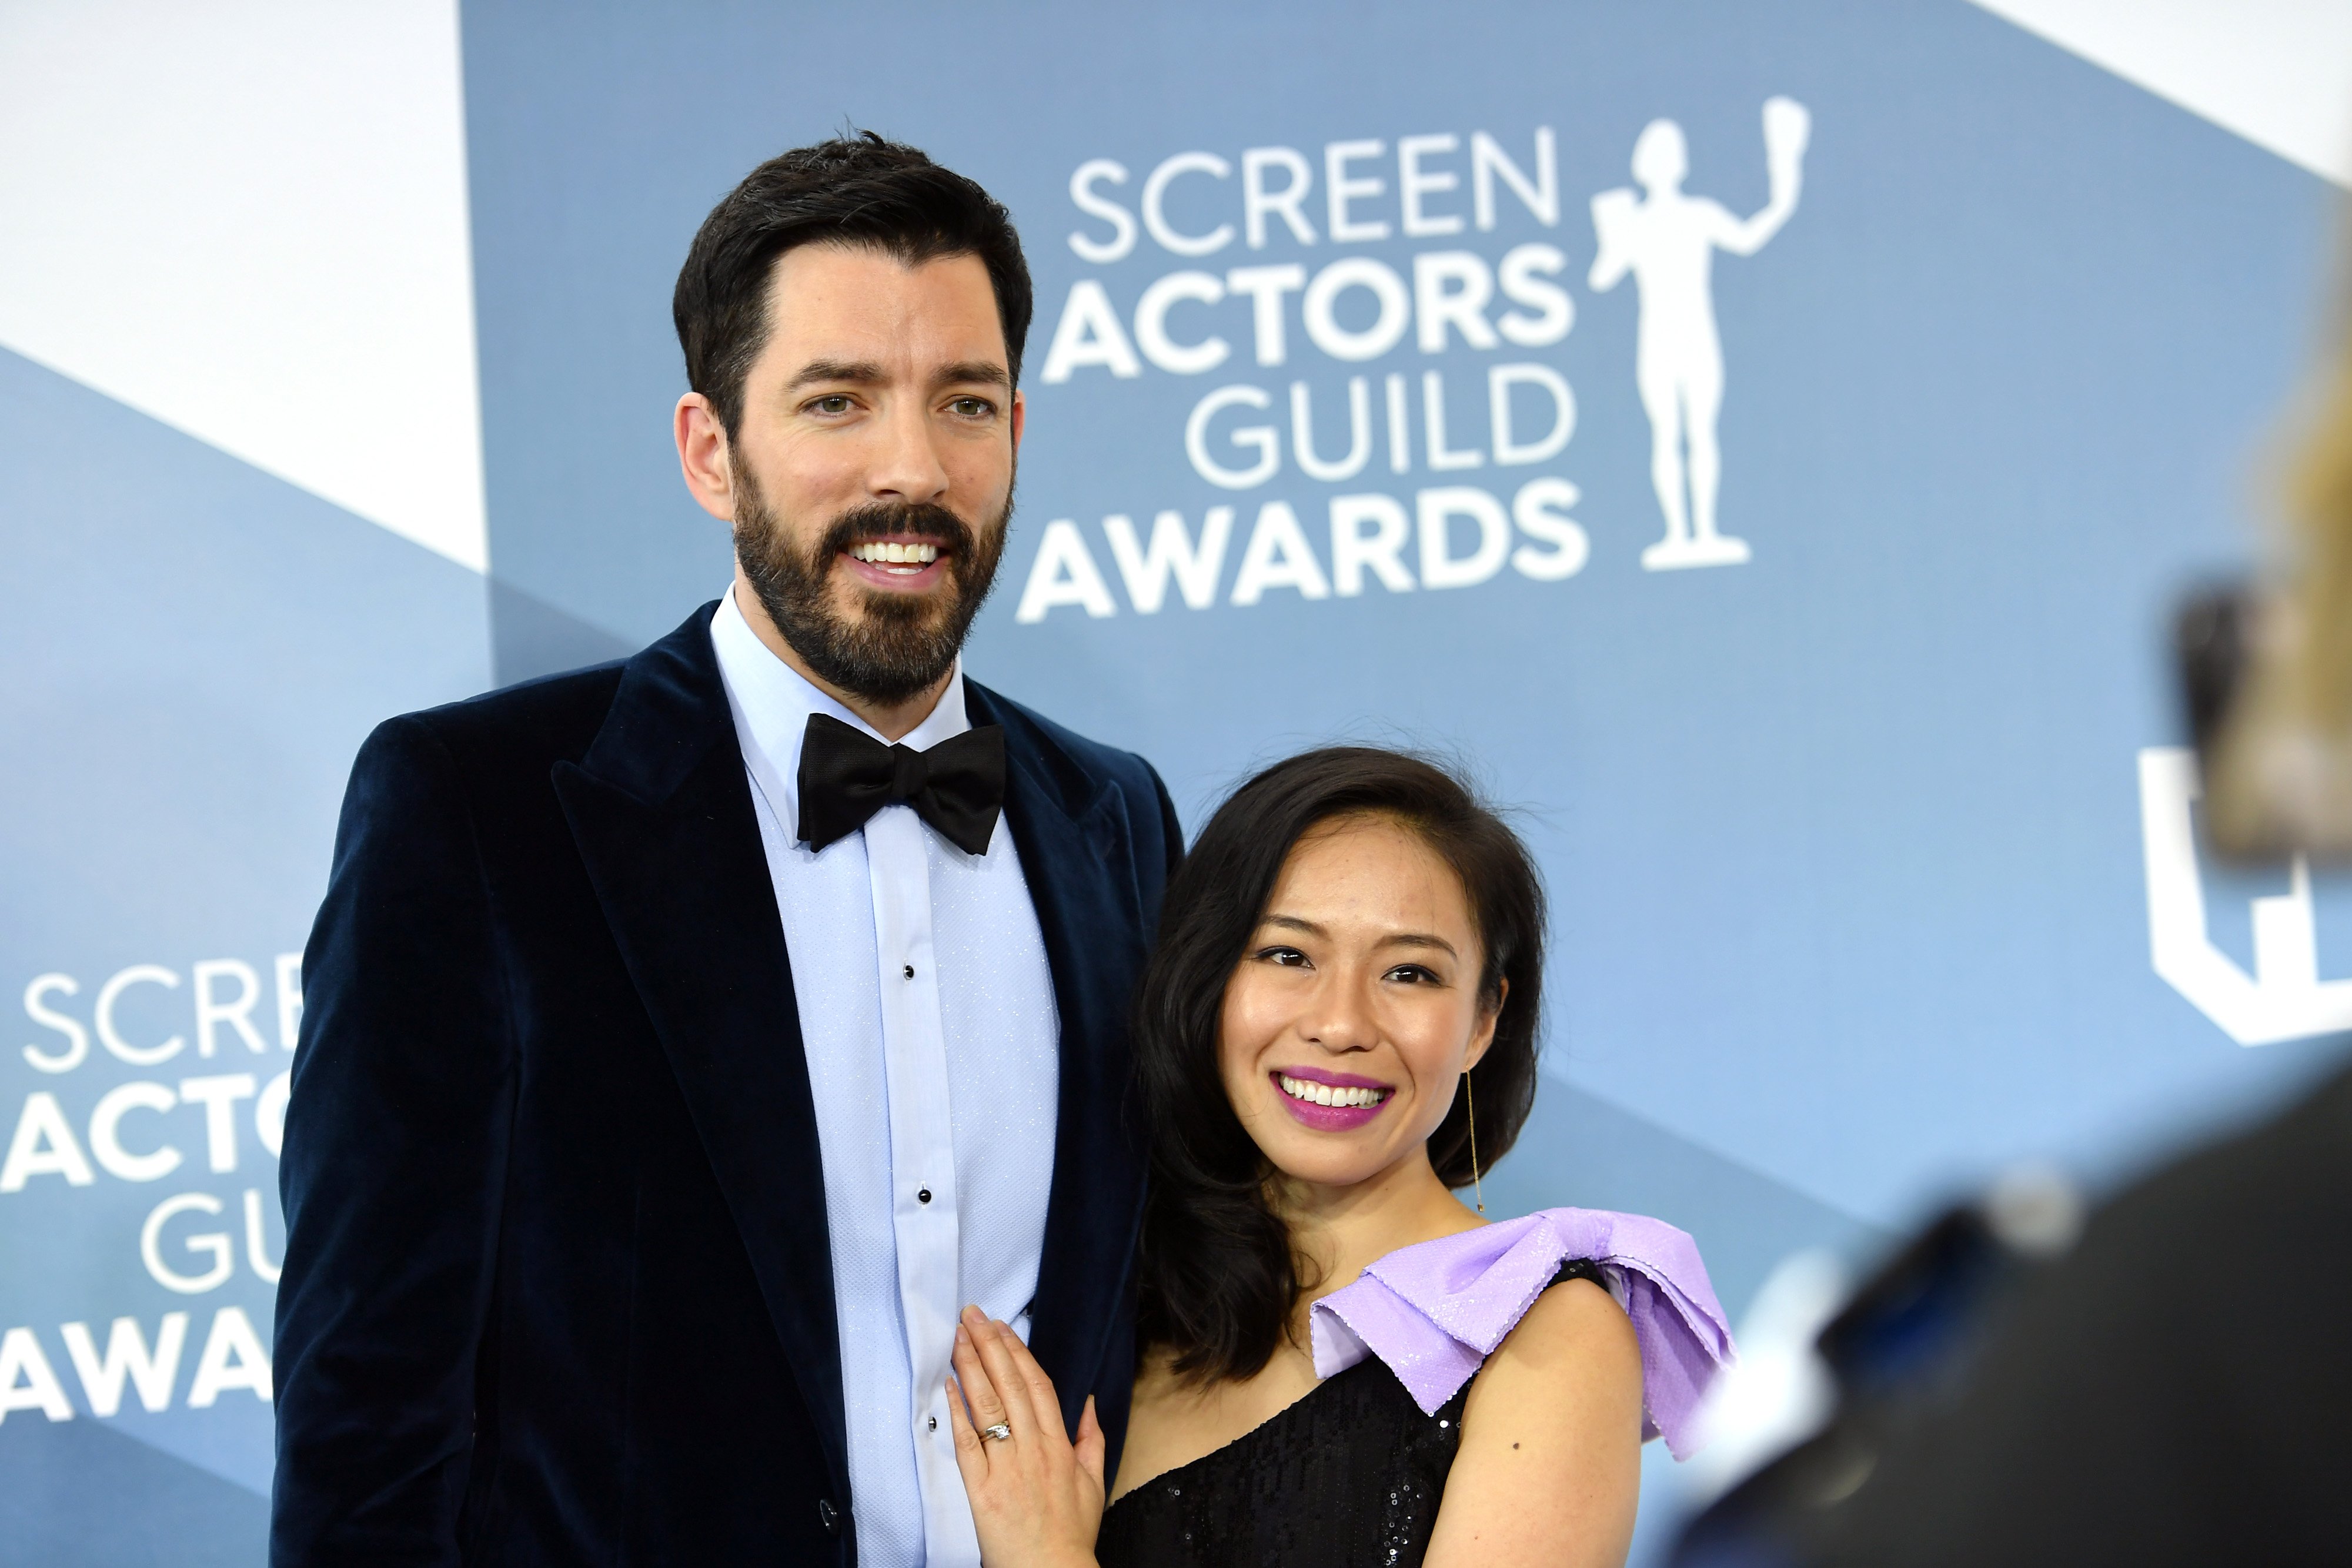 Drew Scott and Linda Phan at the 26th Annual Screen Actors Guild Awards on January 19, 2020, in Los Angeles, California. | Source: Mike Coppola/Getty Images